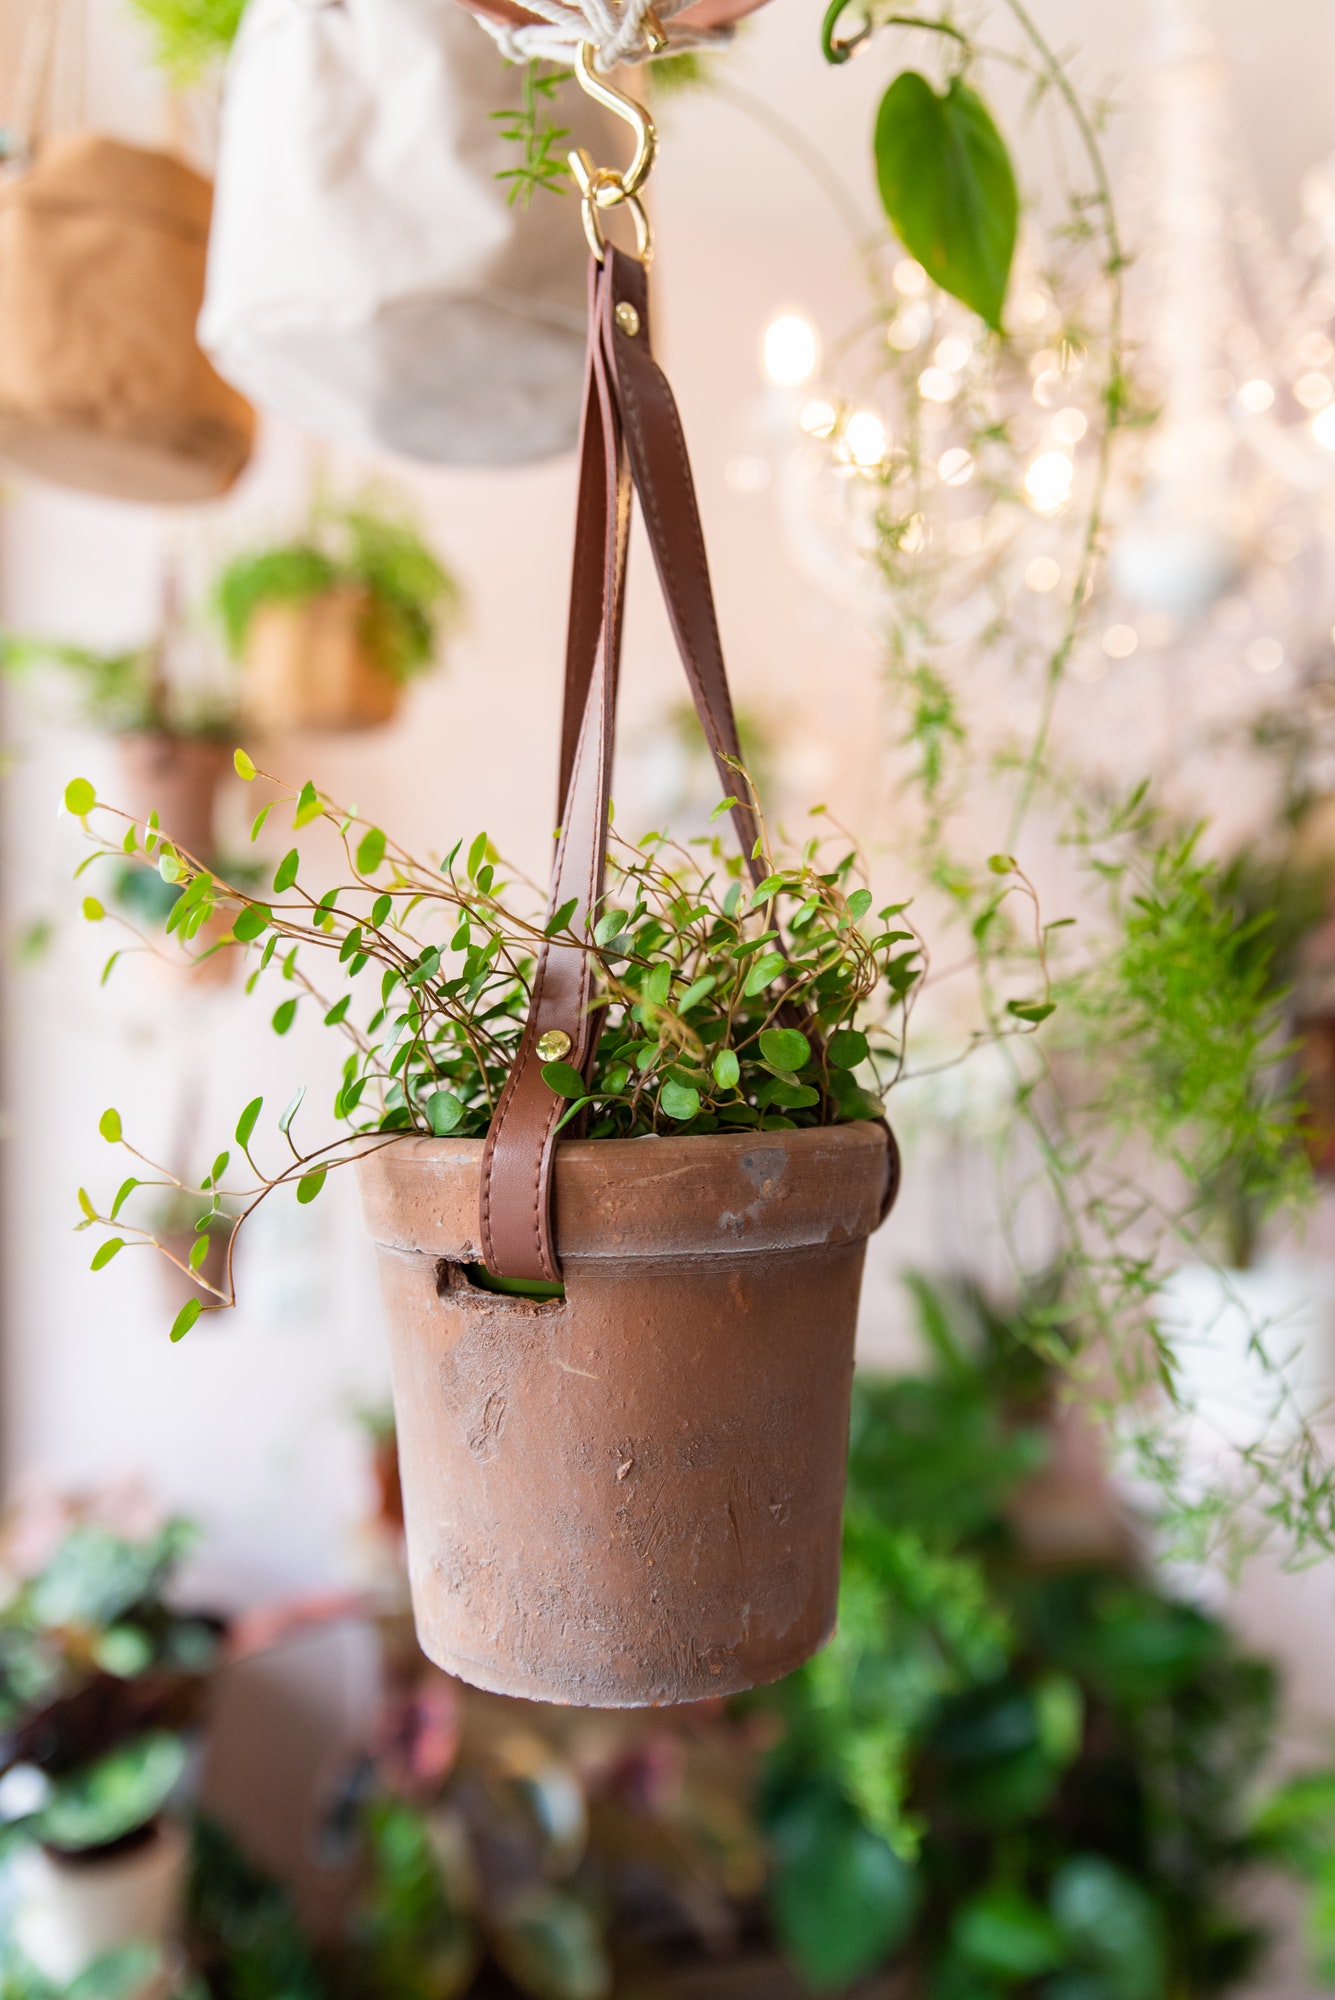 Pot with plant in a floral shop